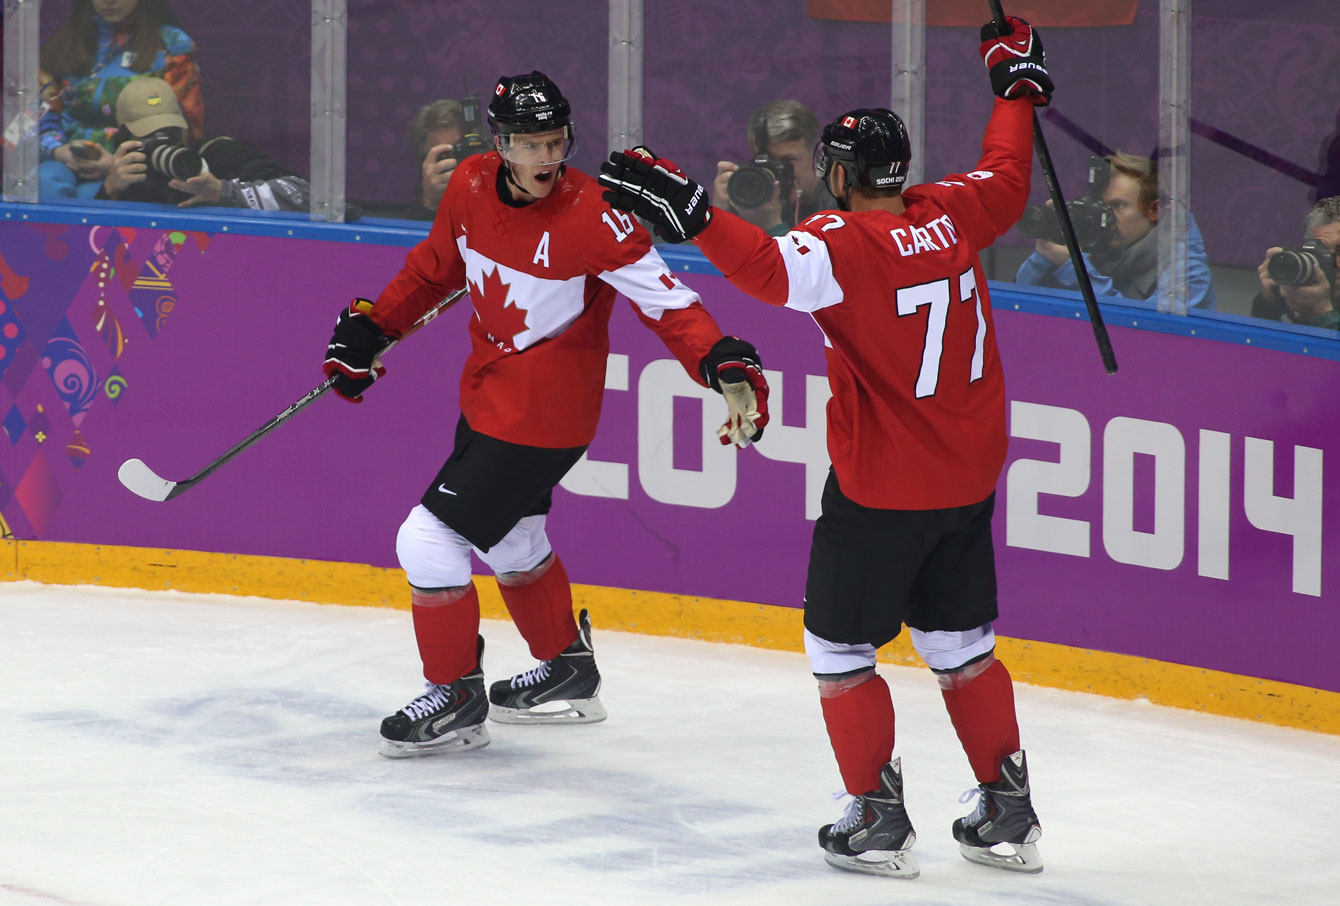 Russia's Alexander Ovechkin shakes hands with Canada's Sidney